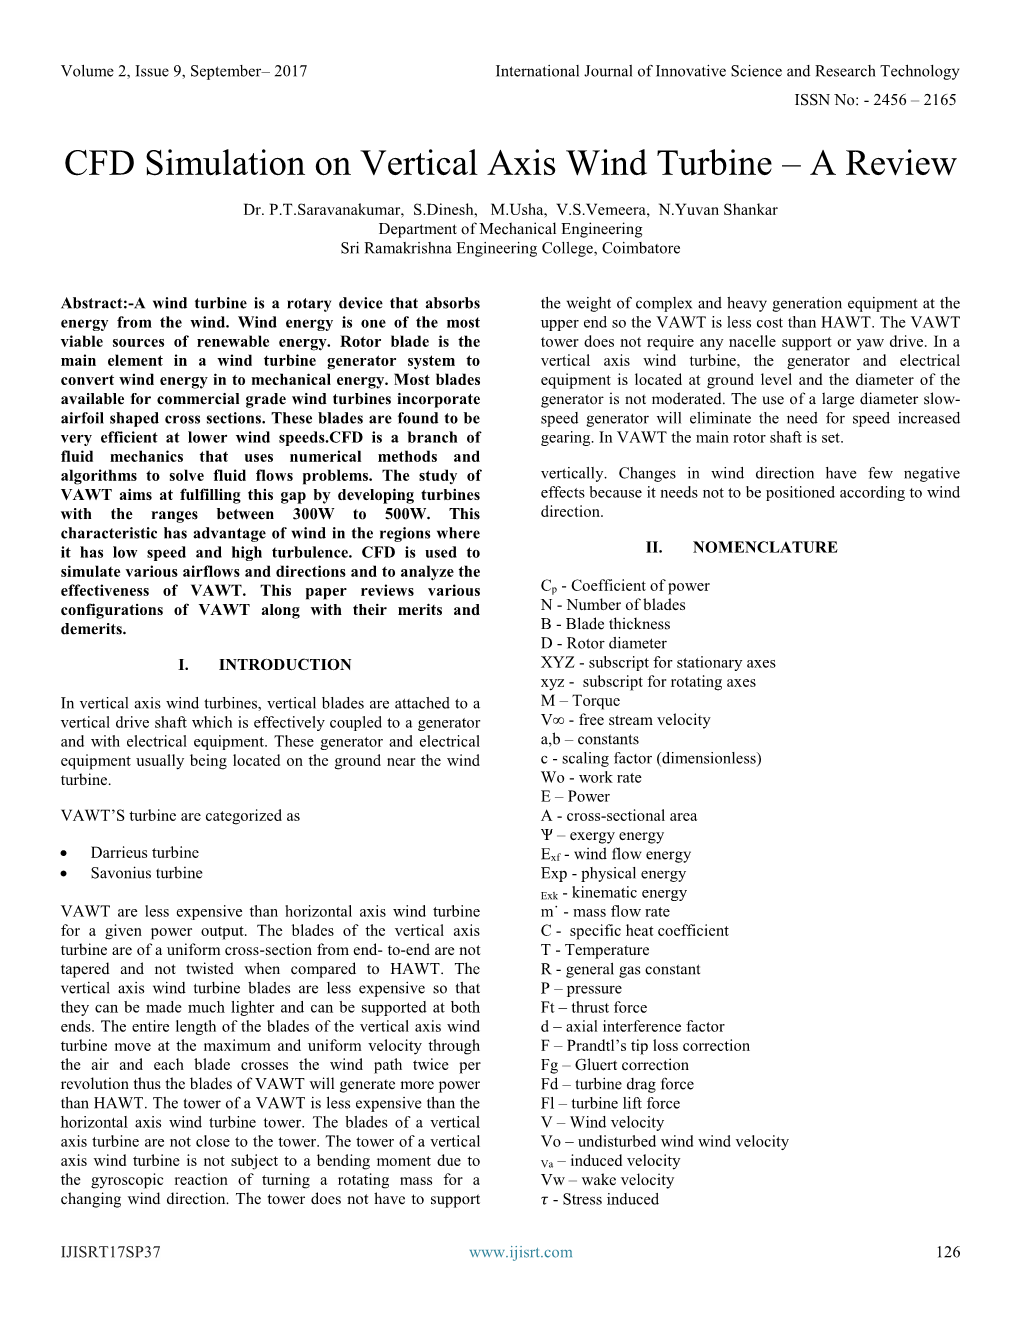 CFD Simulation on Vertical Axis Wind Turbine – a Review